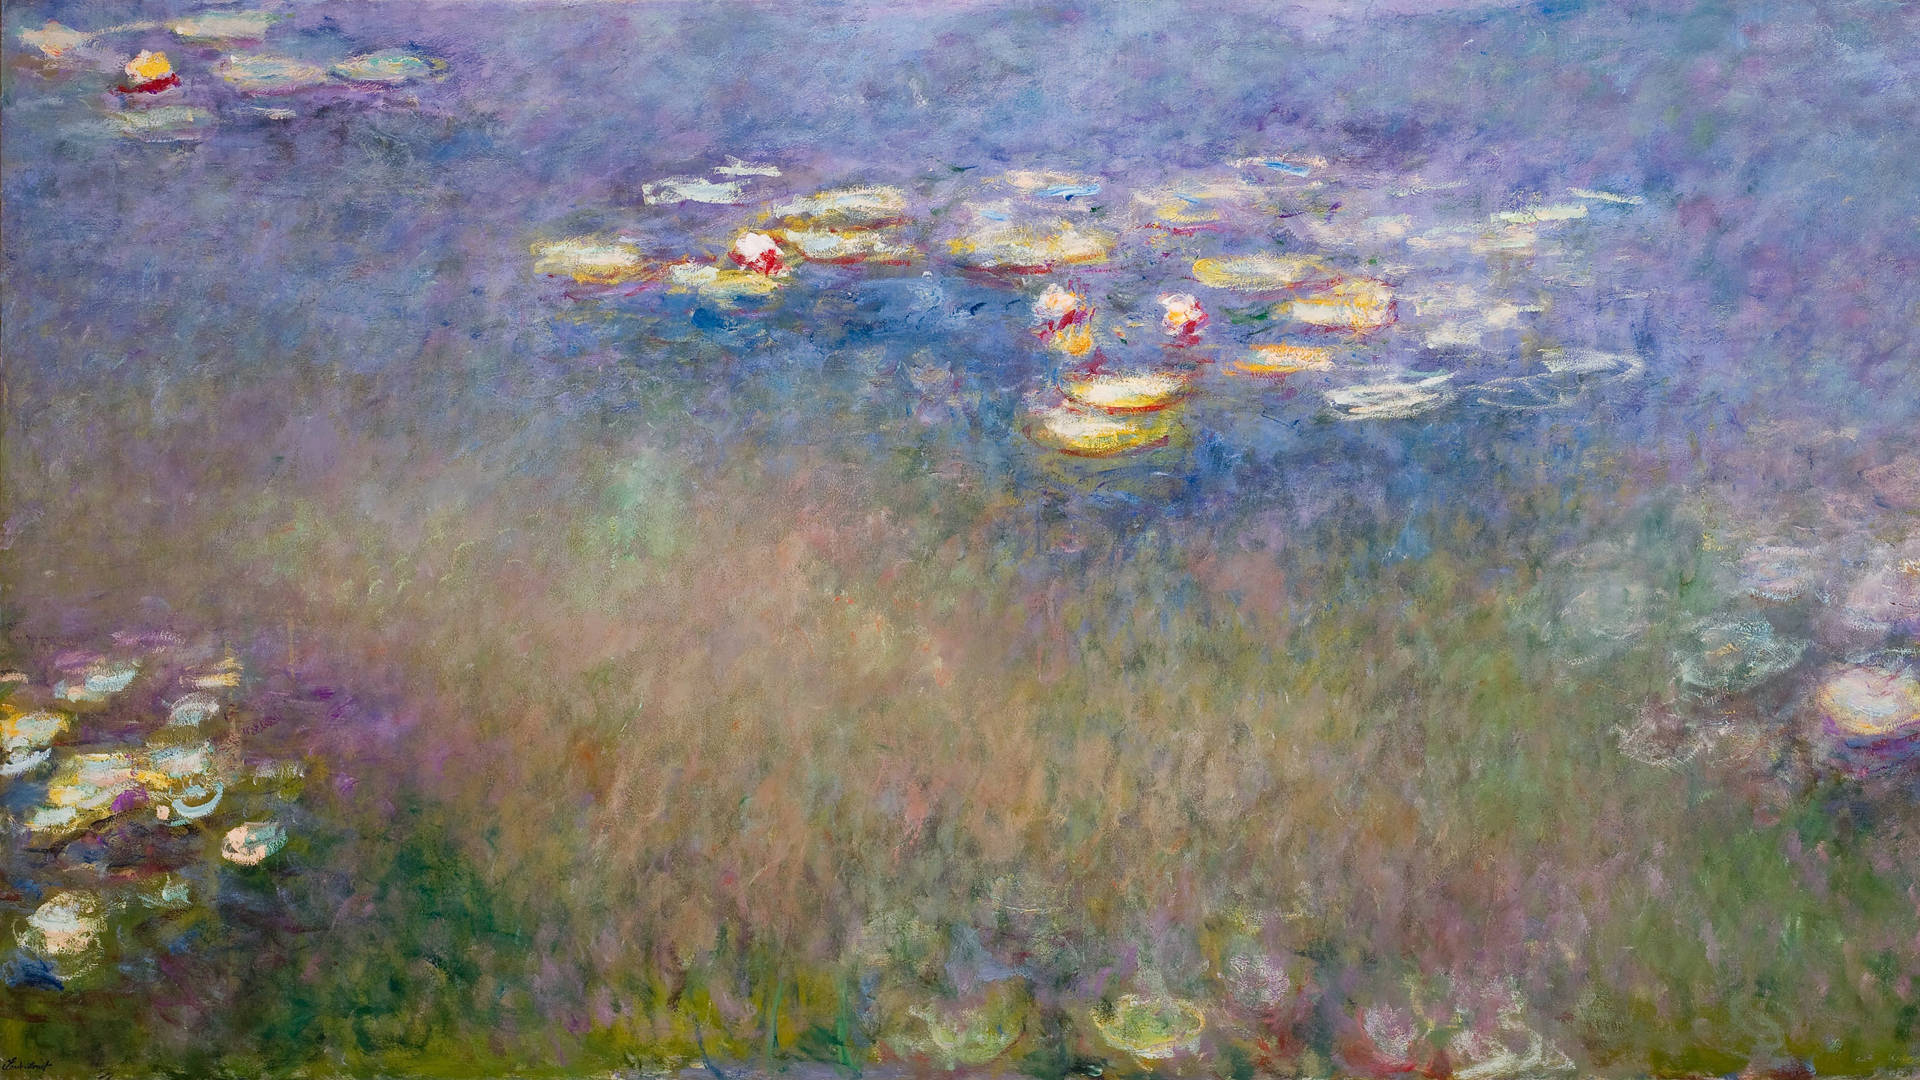 Claude Monet, 'Water Lilies (Agapanthus),' c. 1915-26. Courtesy of the Fine Arts Museums of San Francisco